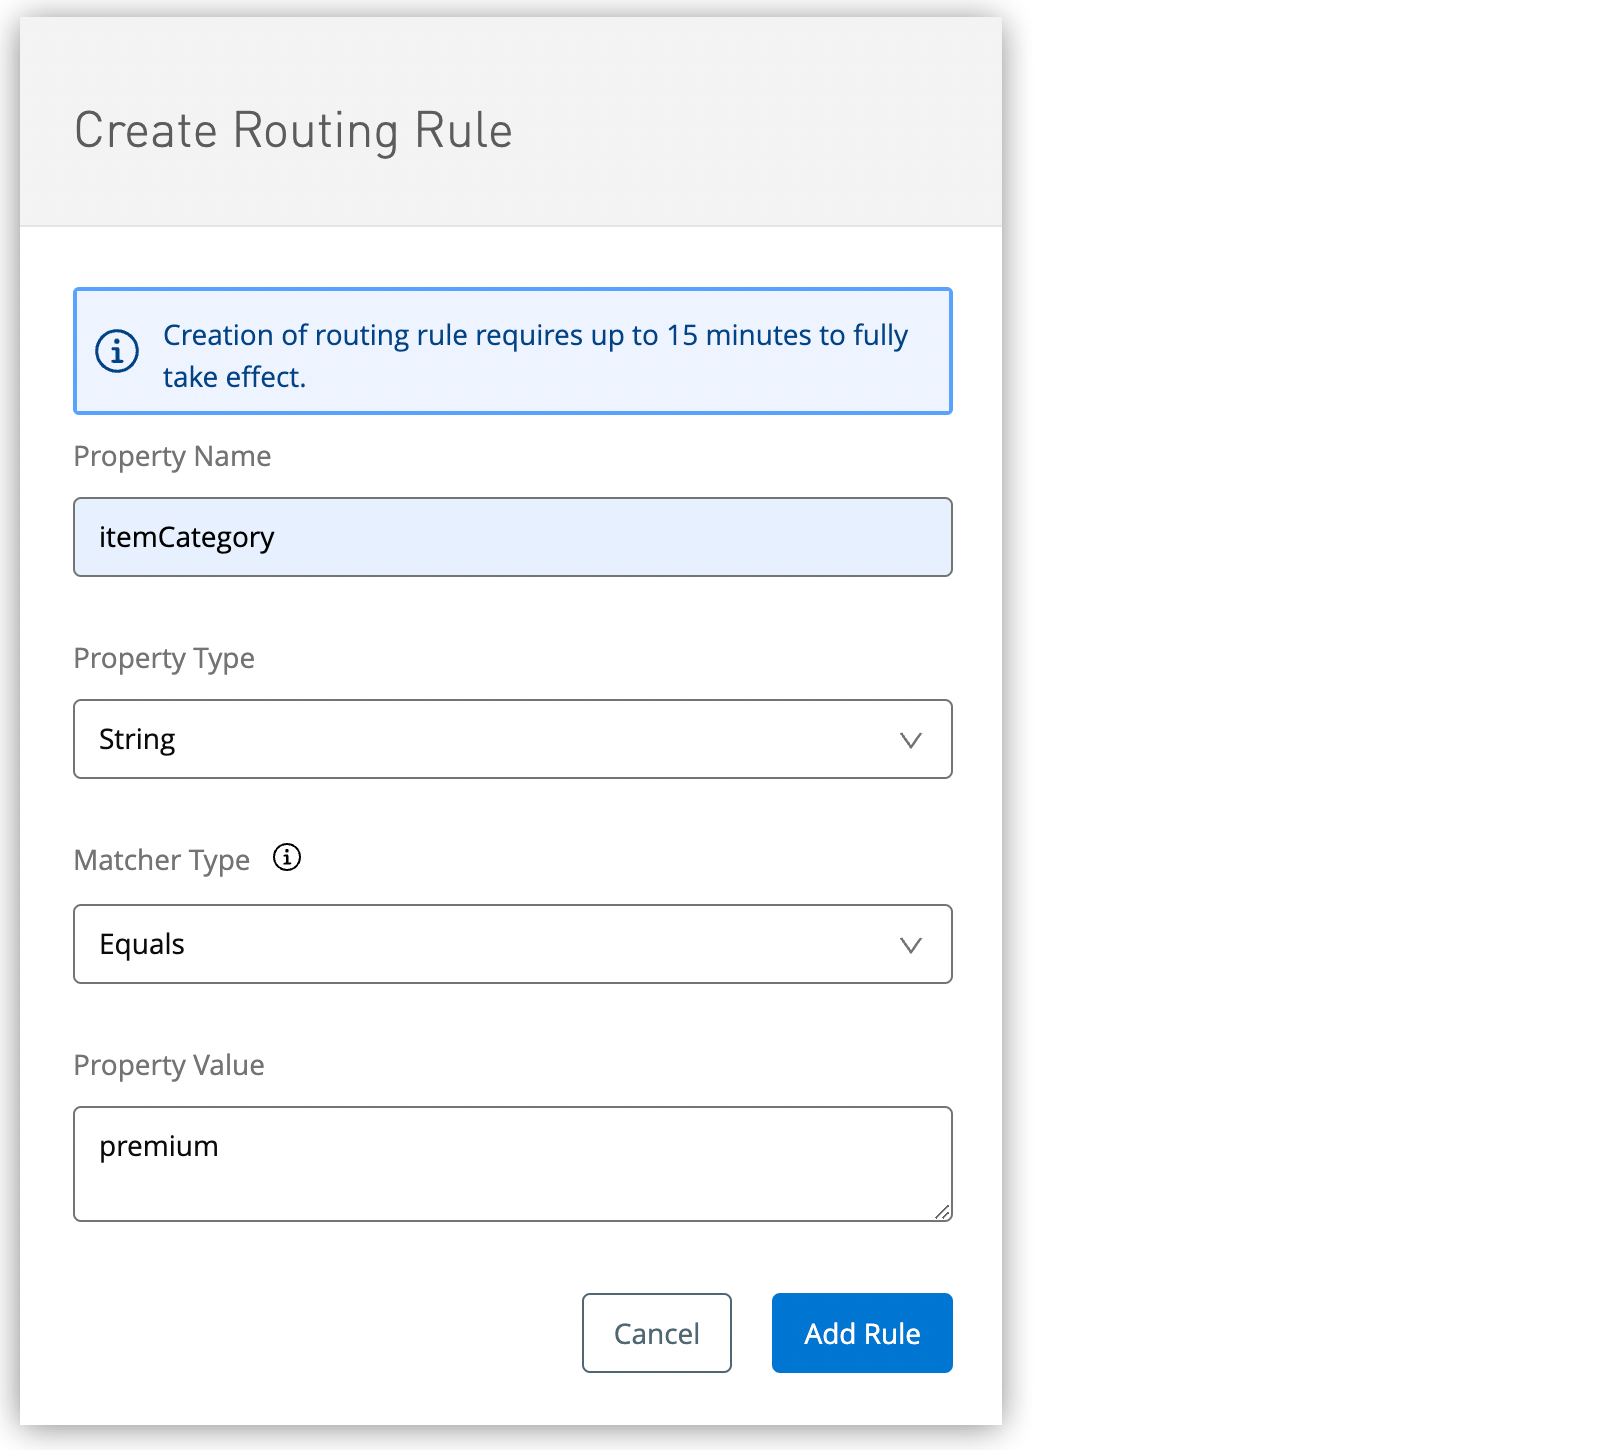 Create Routing Rule page